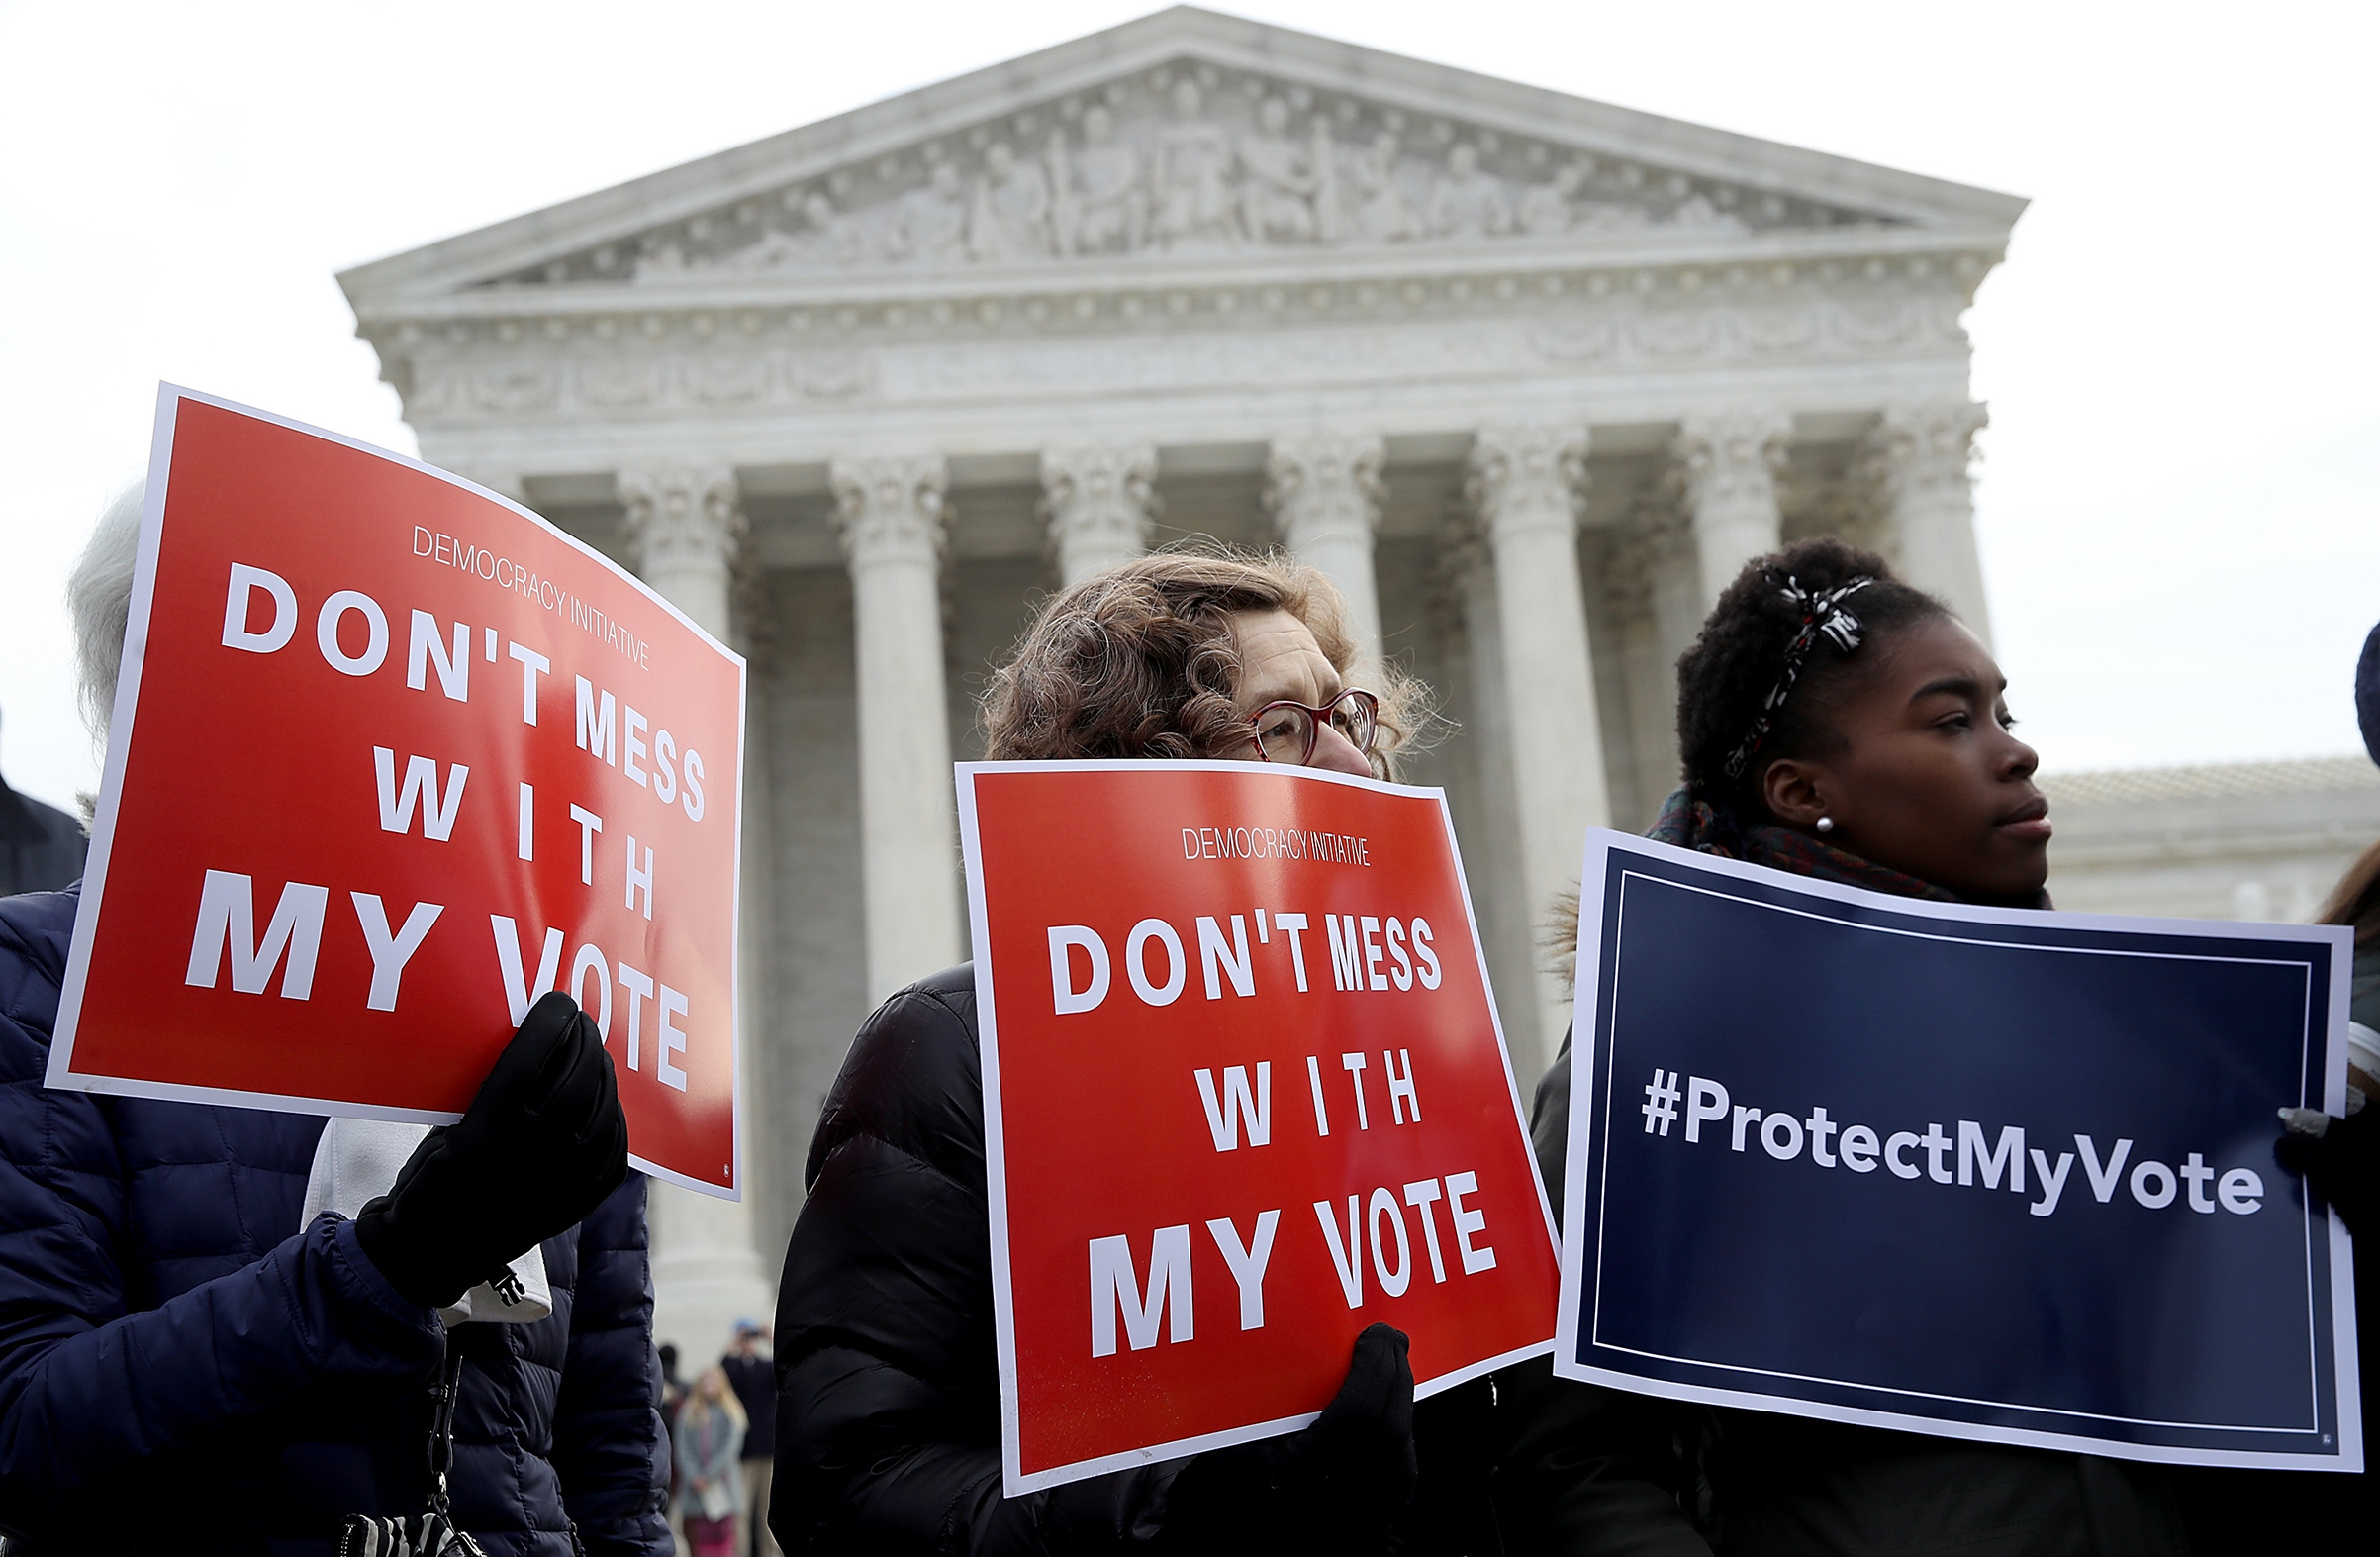 Protesters gather during a rally held by the group Common Cause in front of the U.S. Supreme Court January 10, 2018 in Washington, DC. Voting rights activists rallied to oppose voter roll purges as the Supreme Court hears oral arguments in the Husted v. A Philip Randolph Institute, a challenge to Ohio's voter roll purges. (Win McNamee—Getty Images)